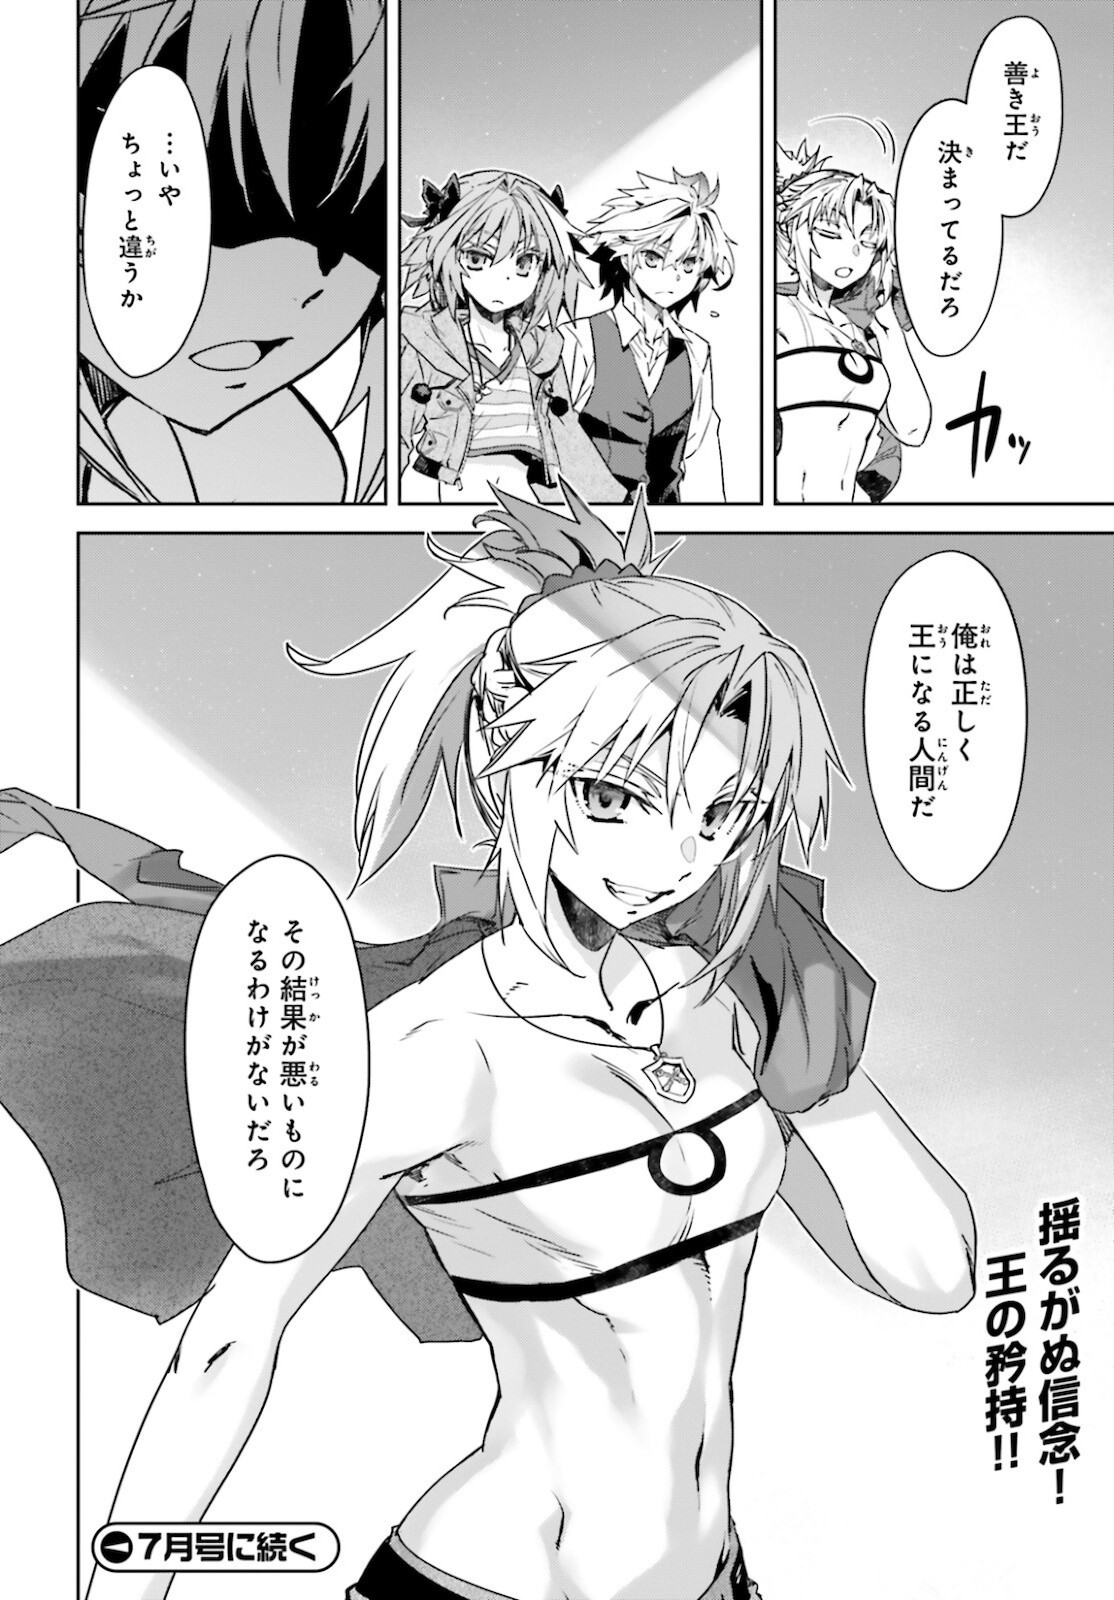 Fate-Apocrypha - Chapter 50 - Page 40